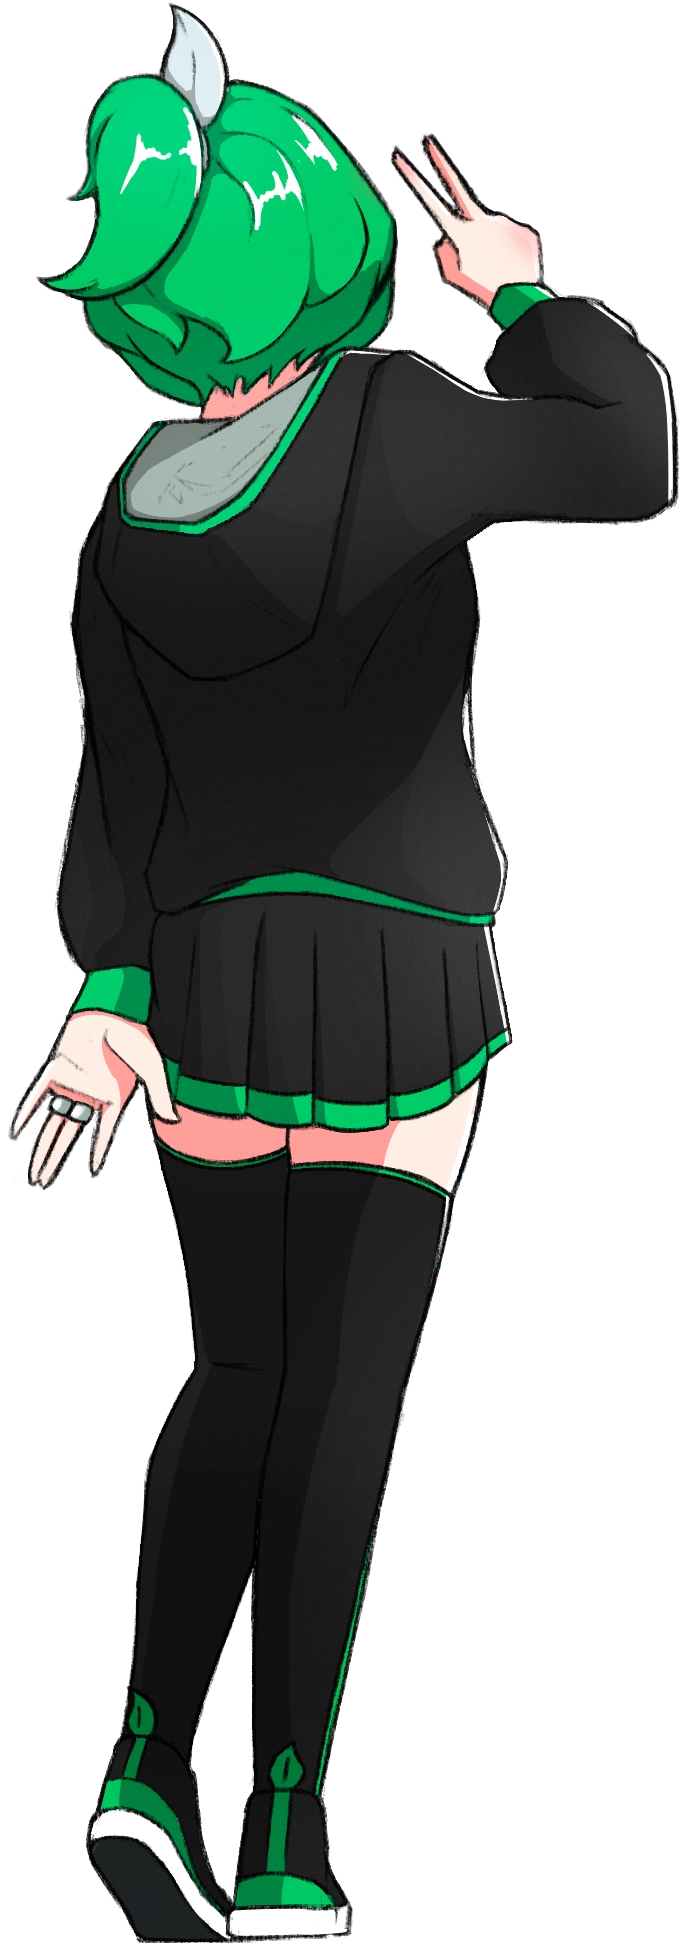 Full-body drawing of Mina doing a peace sign, back perspective.